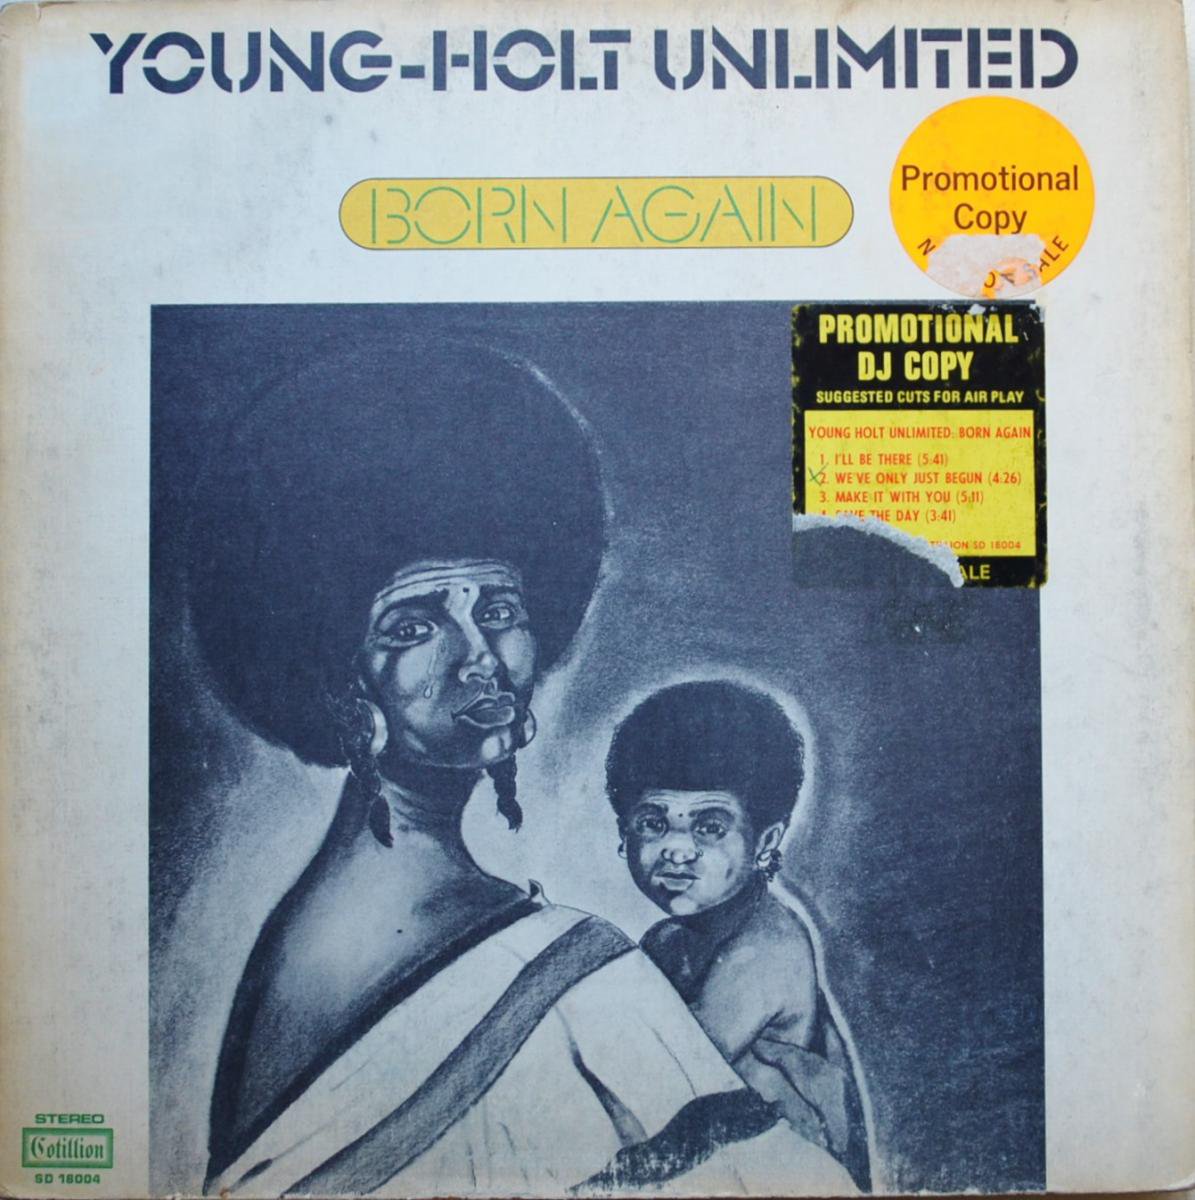 YOUNG-HOLT UNLIMITED / BORN AGAIN (LP)